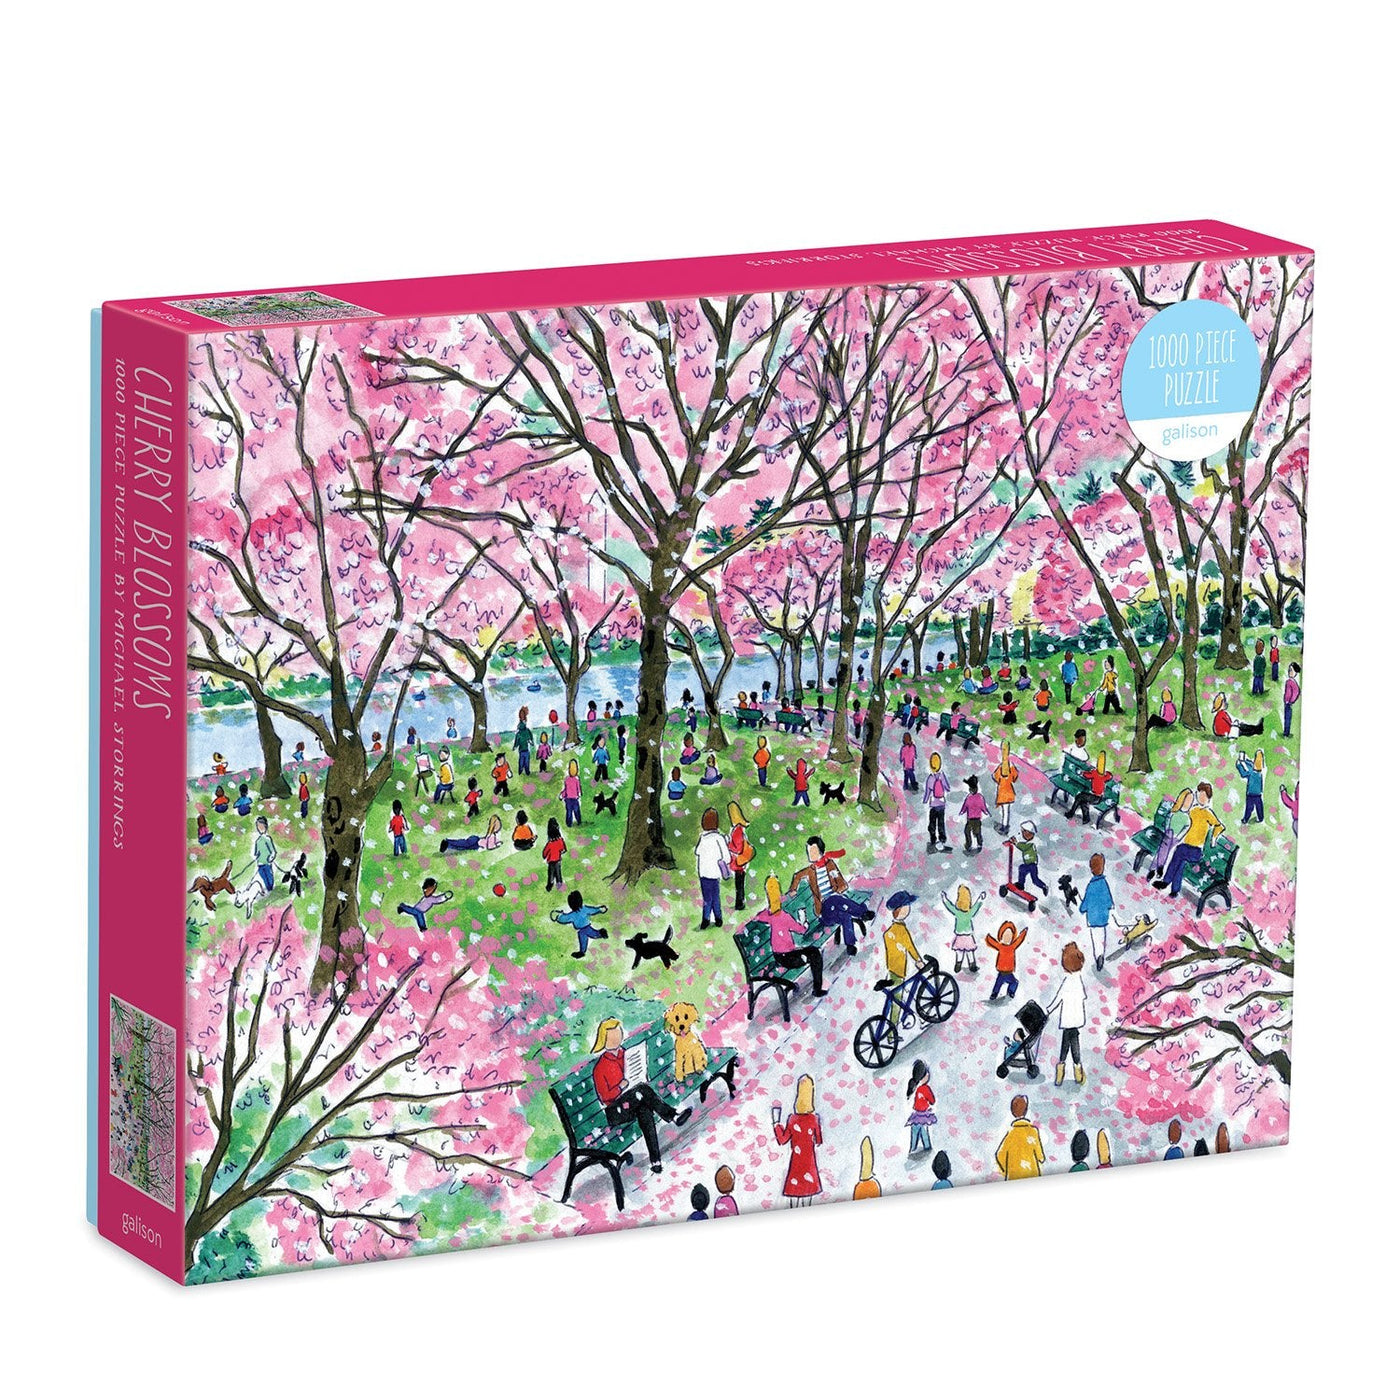 Michael Storrings Cherry Blossoms | 1,000 Piece Jigsaw Puzzle